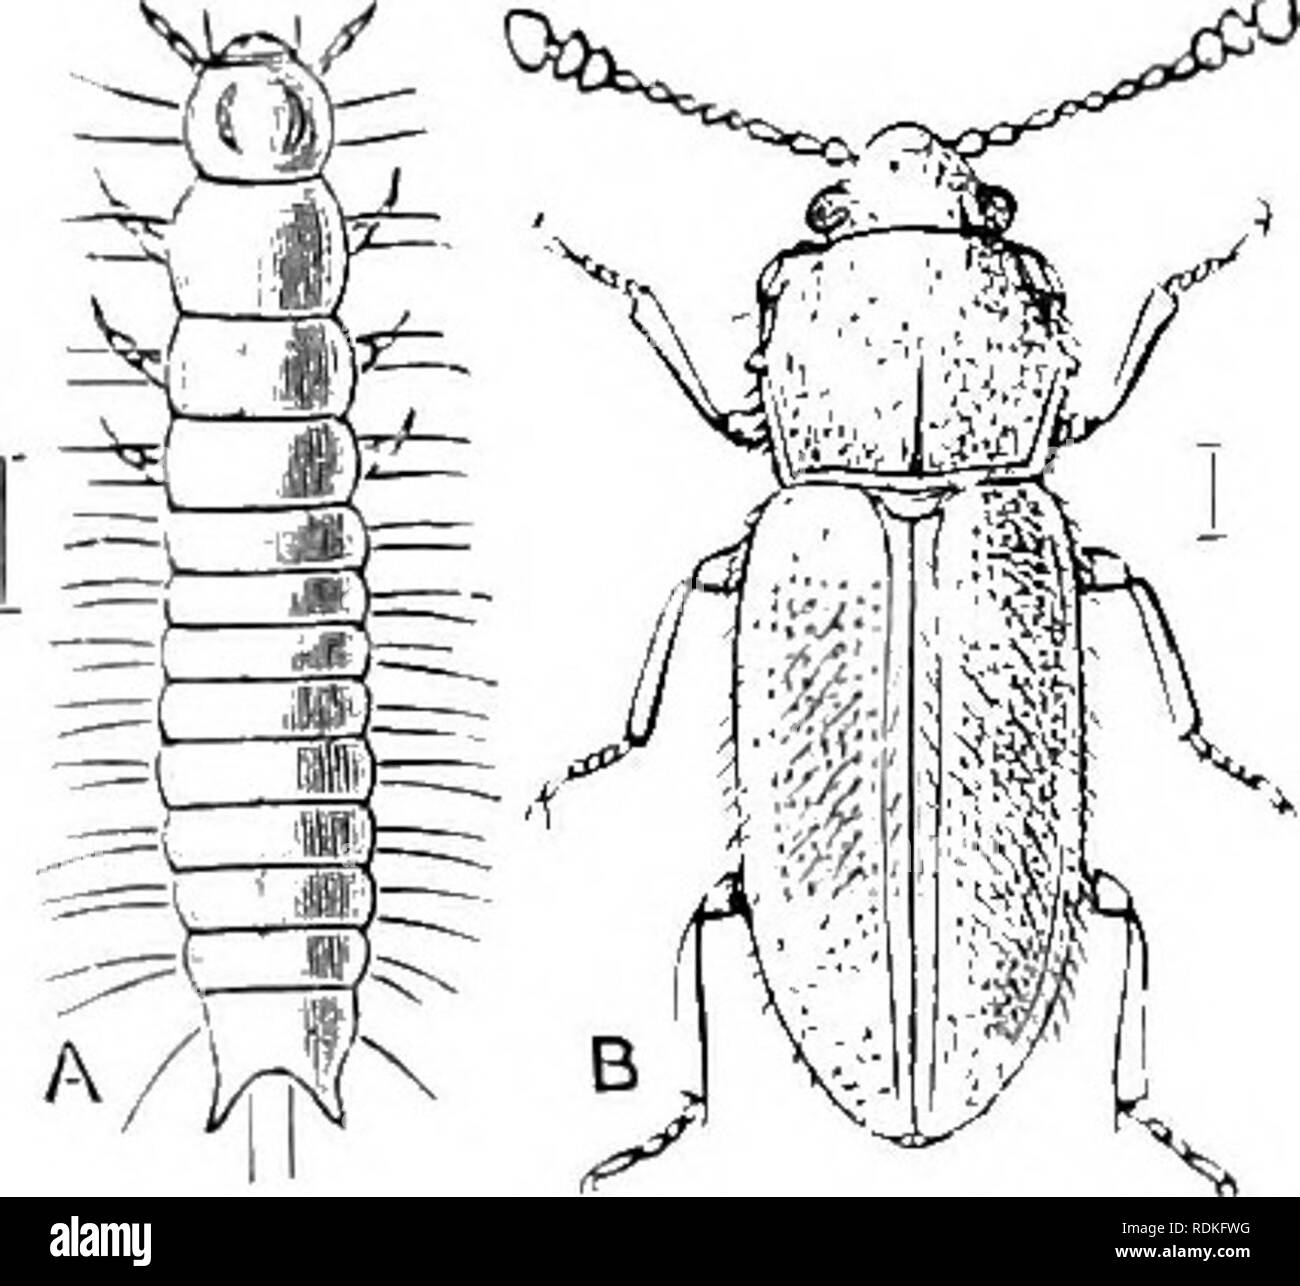 . The Cambridge natural history. Zoology. POLVMORPHA CRYPTOPHAGIDAE HELOTIDAE !3S. Fam. 33. Cryptophagidae.—Front and middle coixic xmj. small and deeply embedded; antennae ivith enlarr/ed terminal joints; tarsi five-jointed, the posterior sometimes in the male only four- jointed; ahdomen with five visible rentrcd segments, eapable of movement, the first much longer than any of the others. A small family composed of obscure forms of minute size, which apparently have mould-eating habits, though very little is known on this point, and several of the genera {Antherophagus, Telmatophi- lus) are f Stock Photo